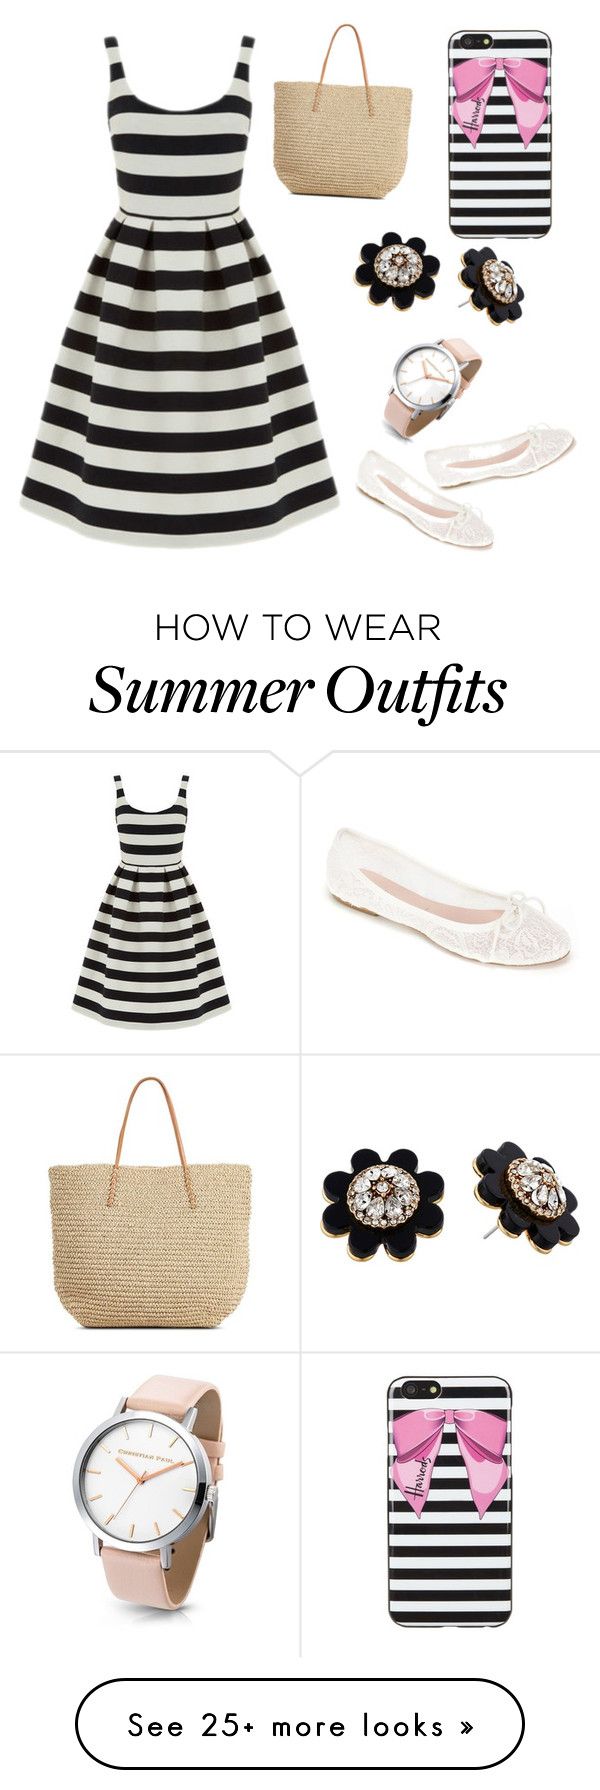 "Summer outfits#5" by thediamondkitty on Polyvore featuring Warehouse,...